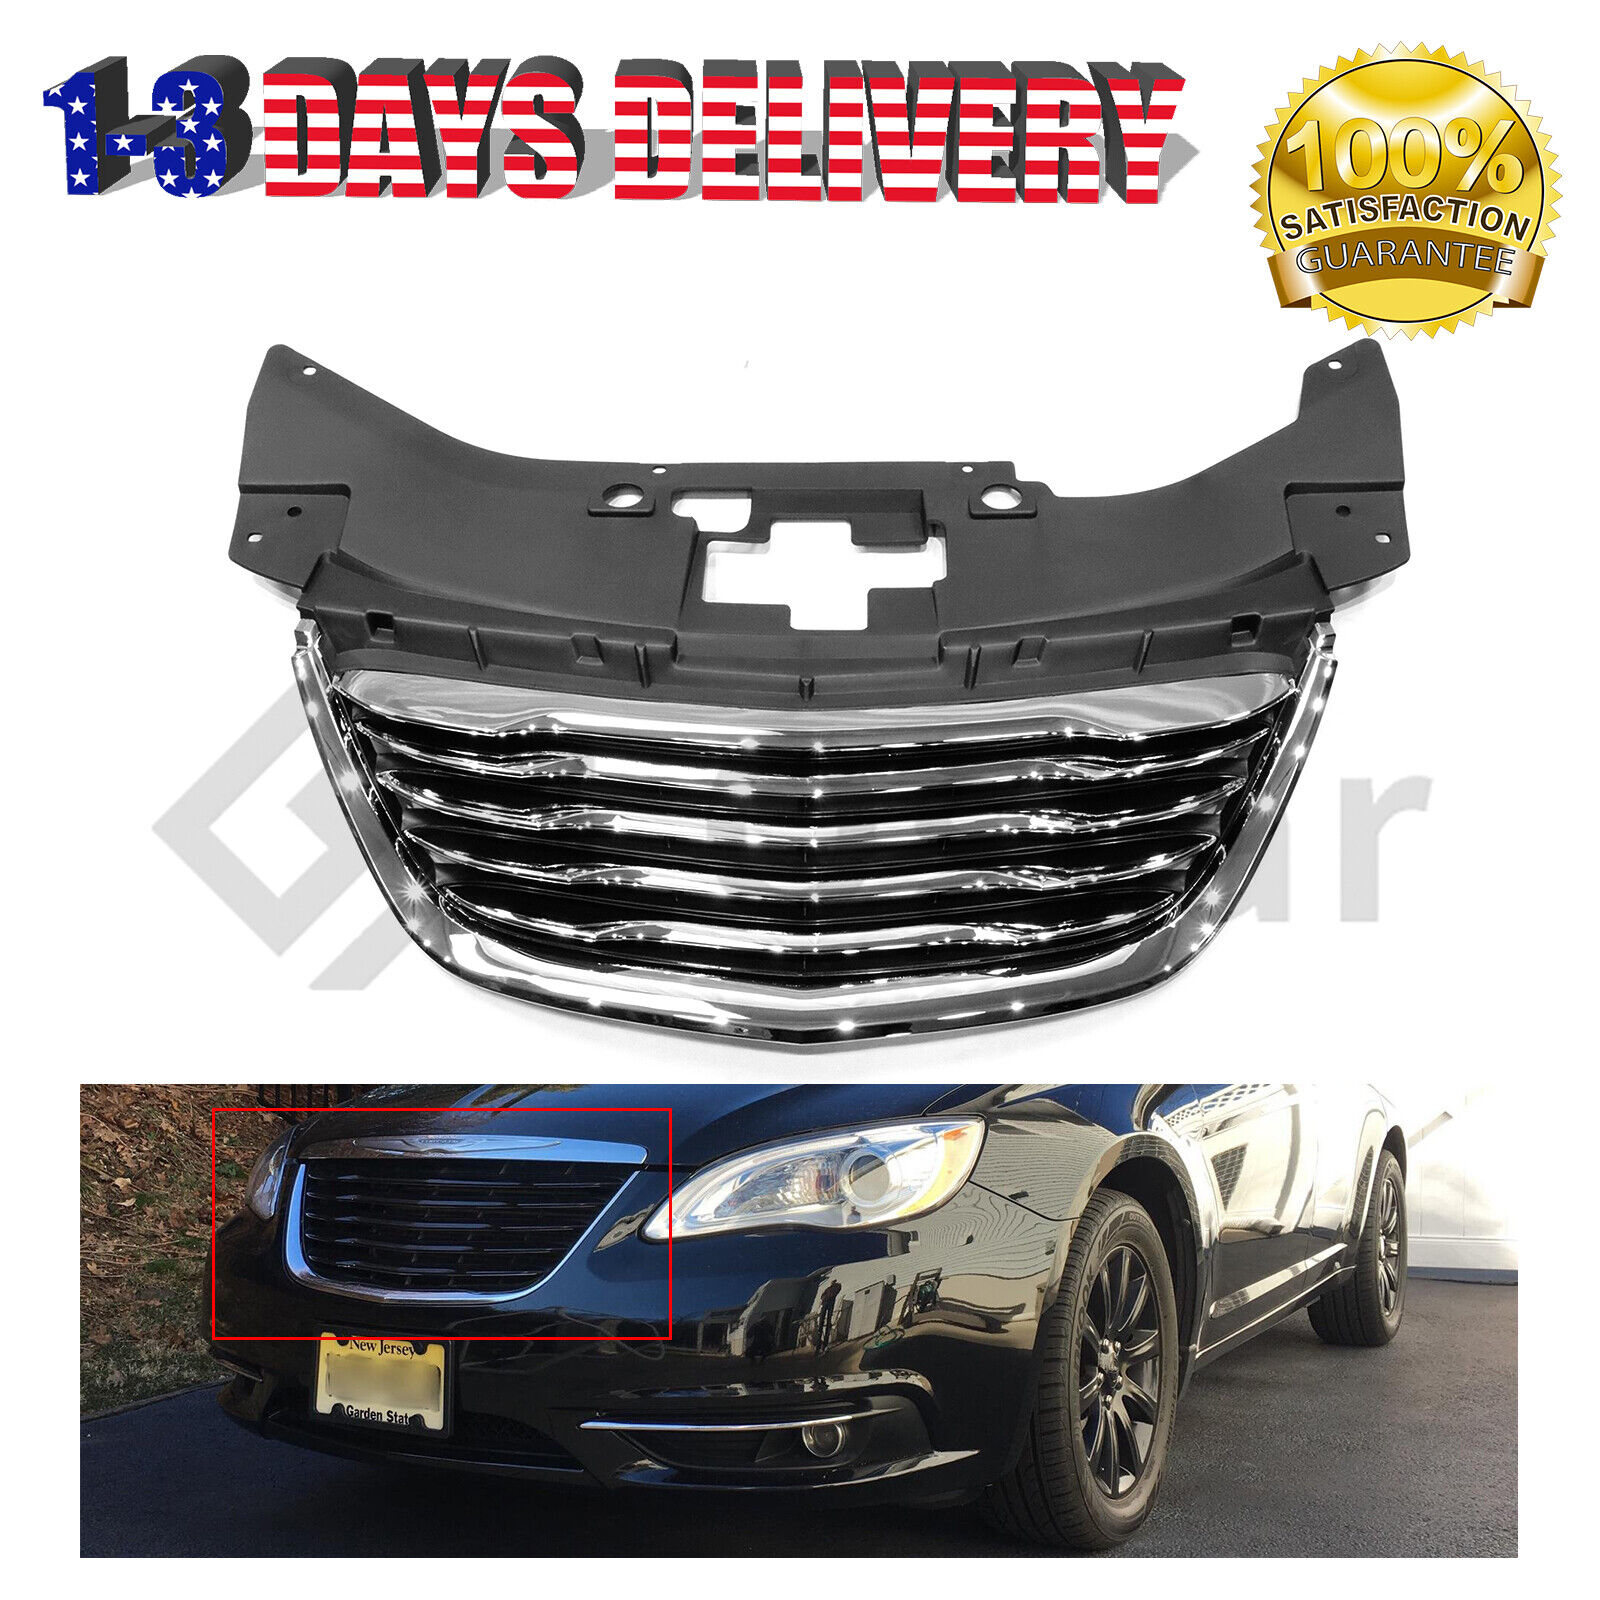 New Front Hood Grille Grill Chrome 68082050AE Fits 2011-2014 Chrysler 200